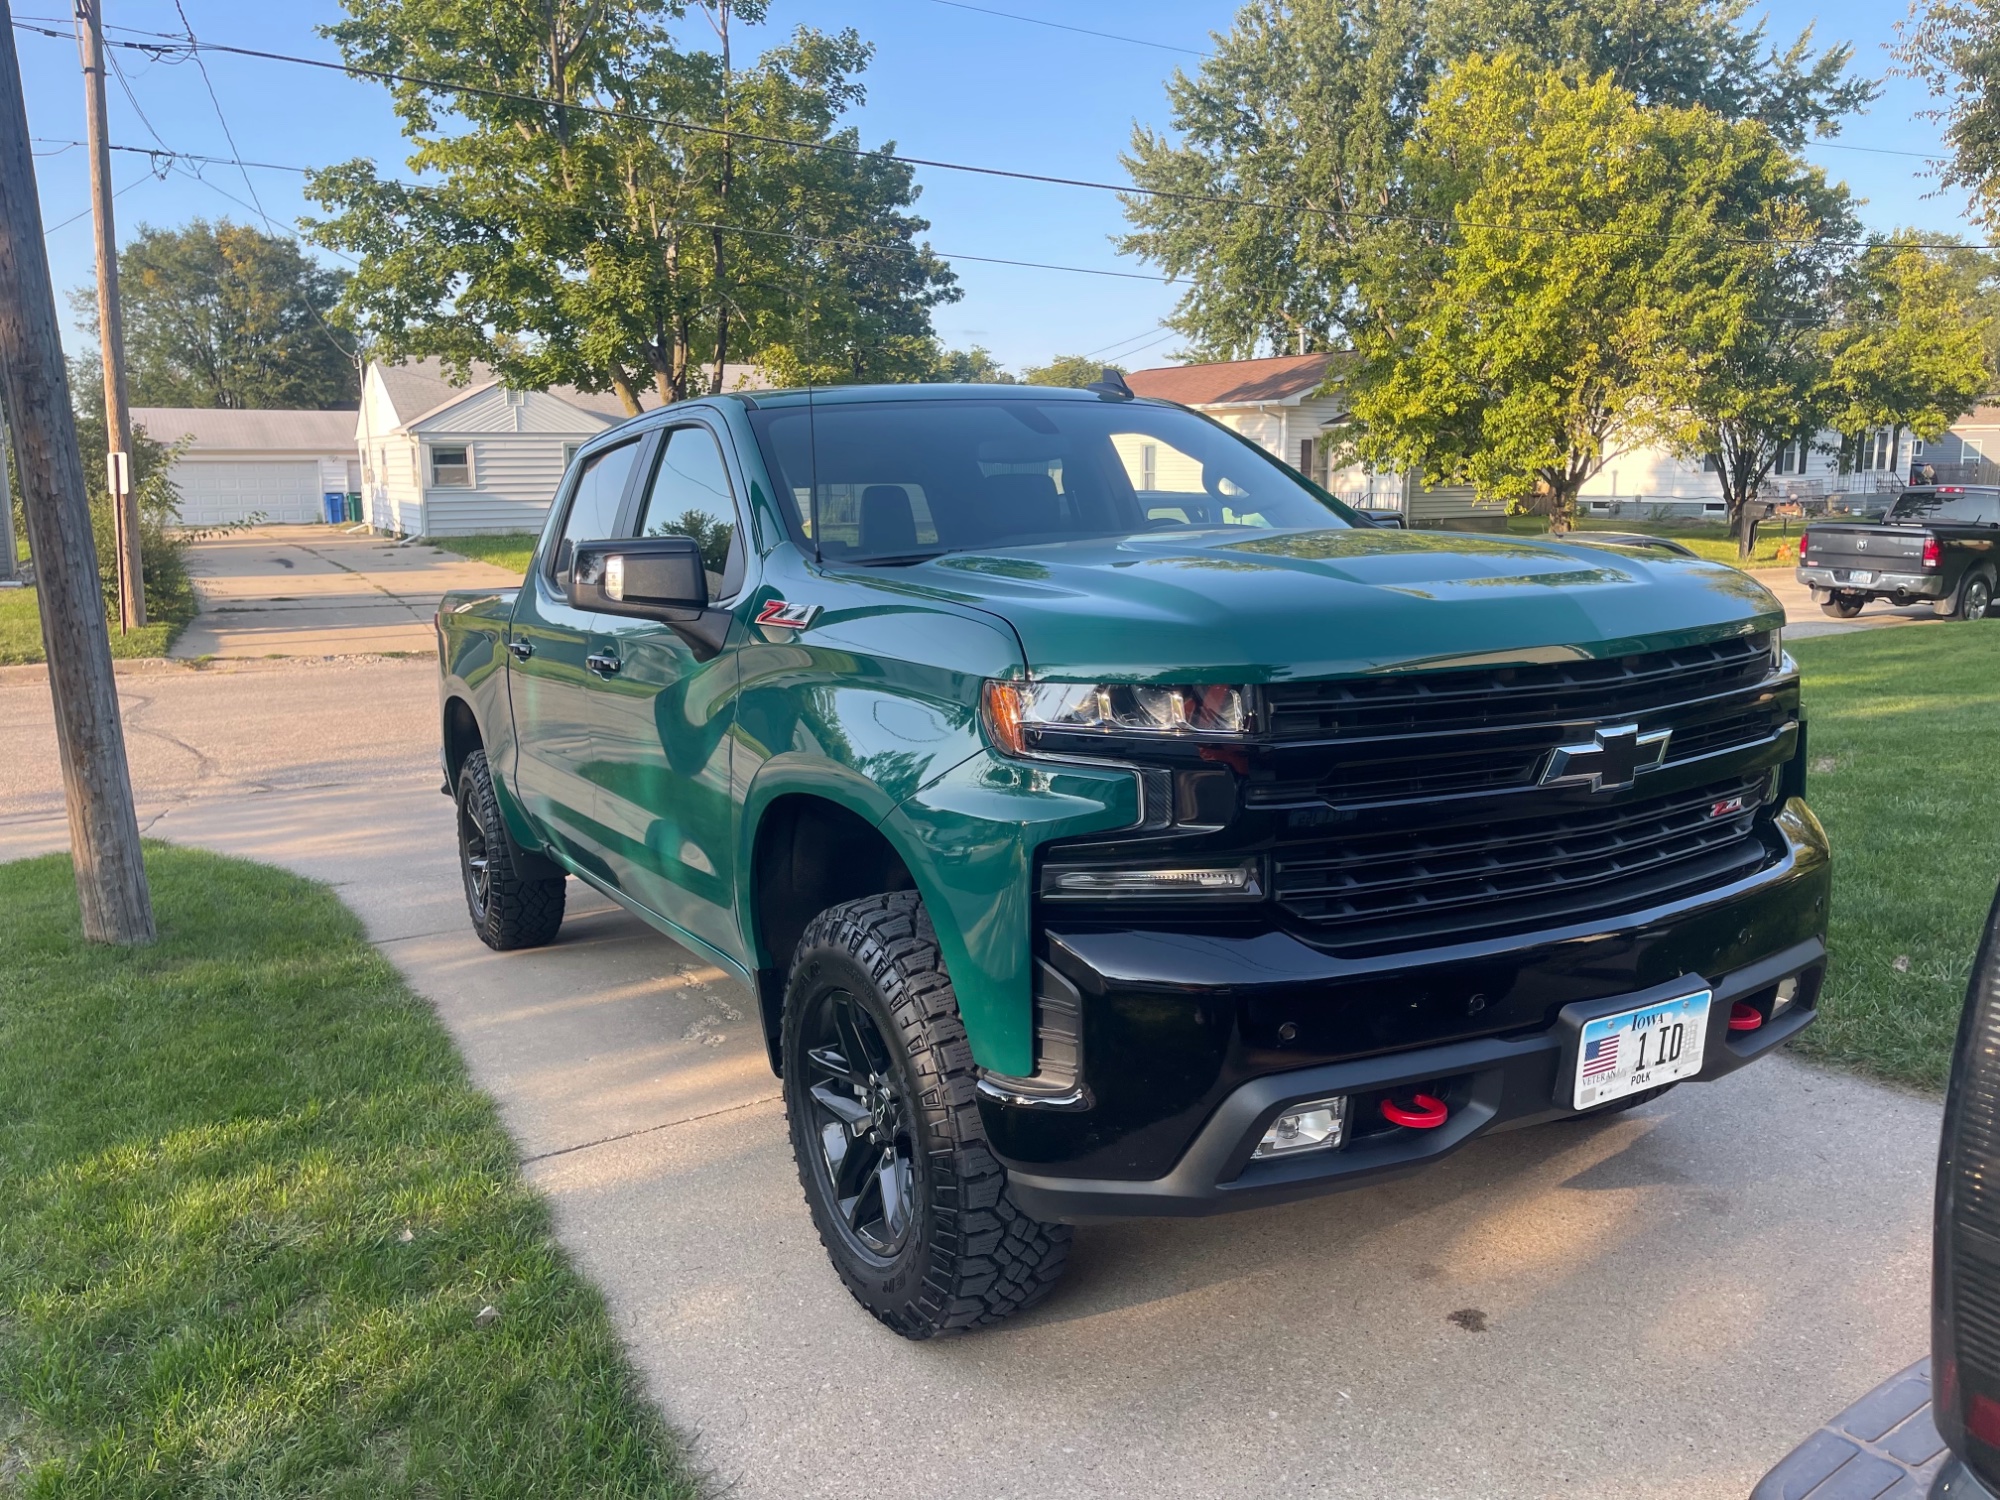 🌲WOODLAND GREEN TRAILBOSS 🌲 🚨 Come get it before its gone! #gowithgarcia  #thompsonchevroletbuickgmc #pattersonca